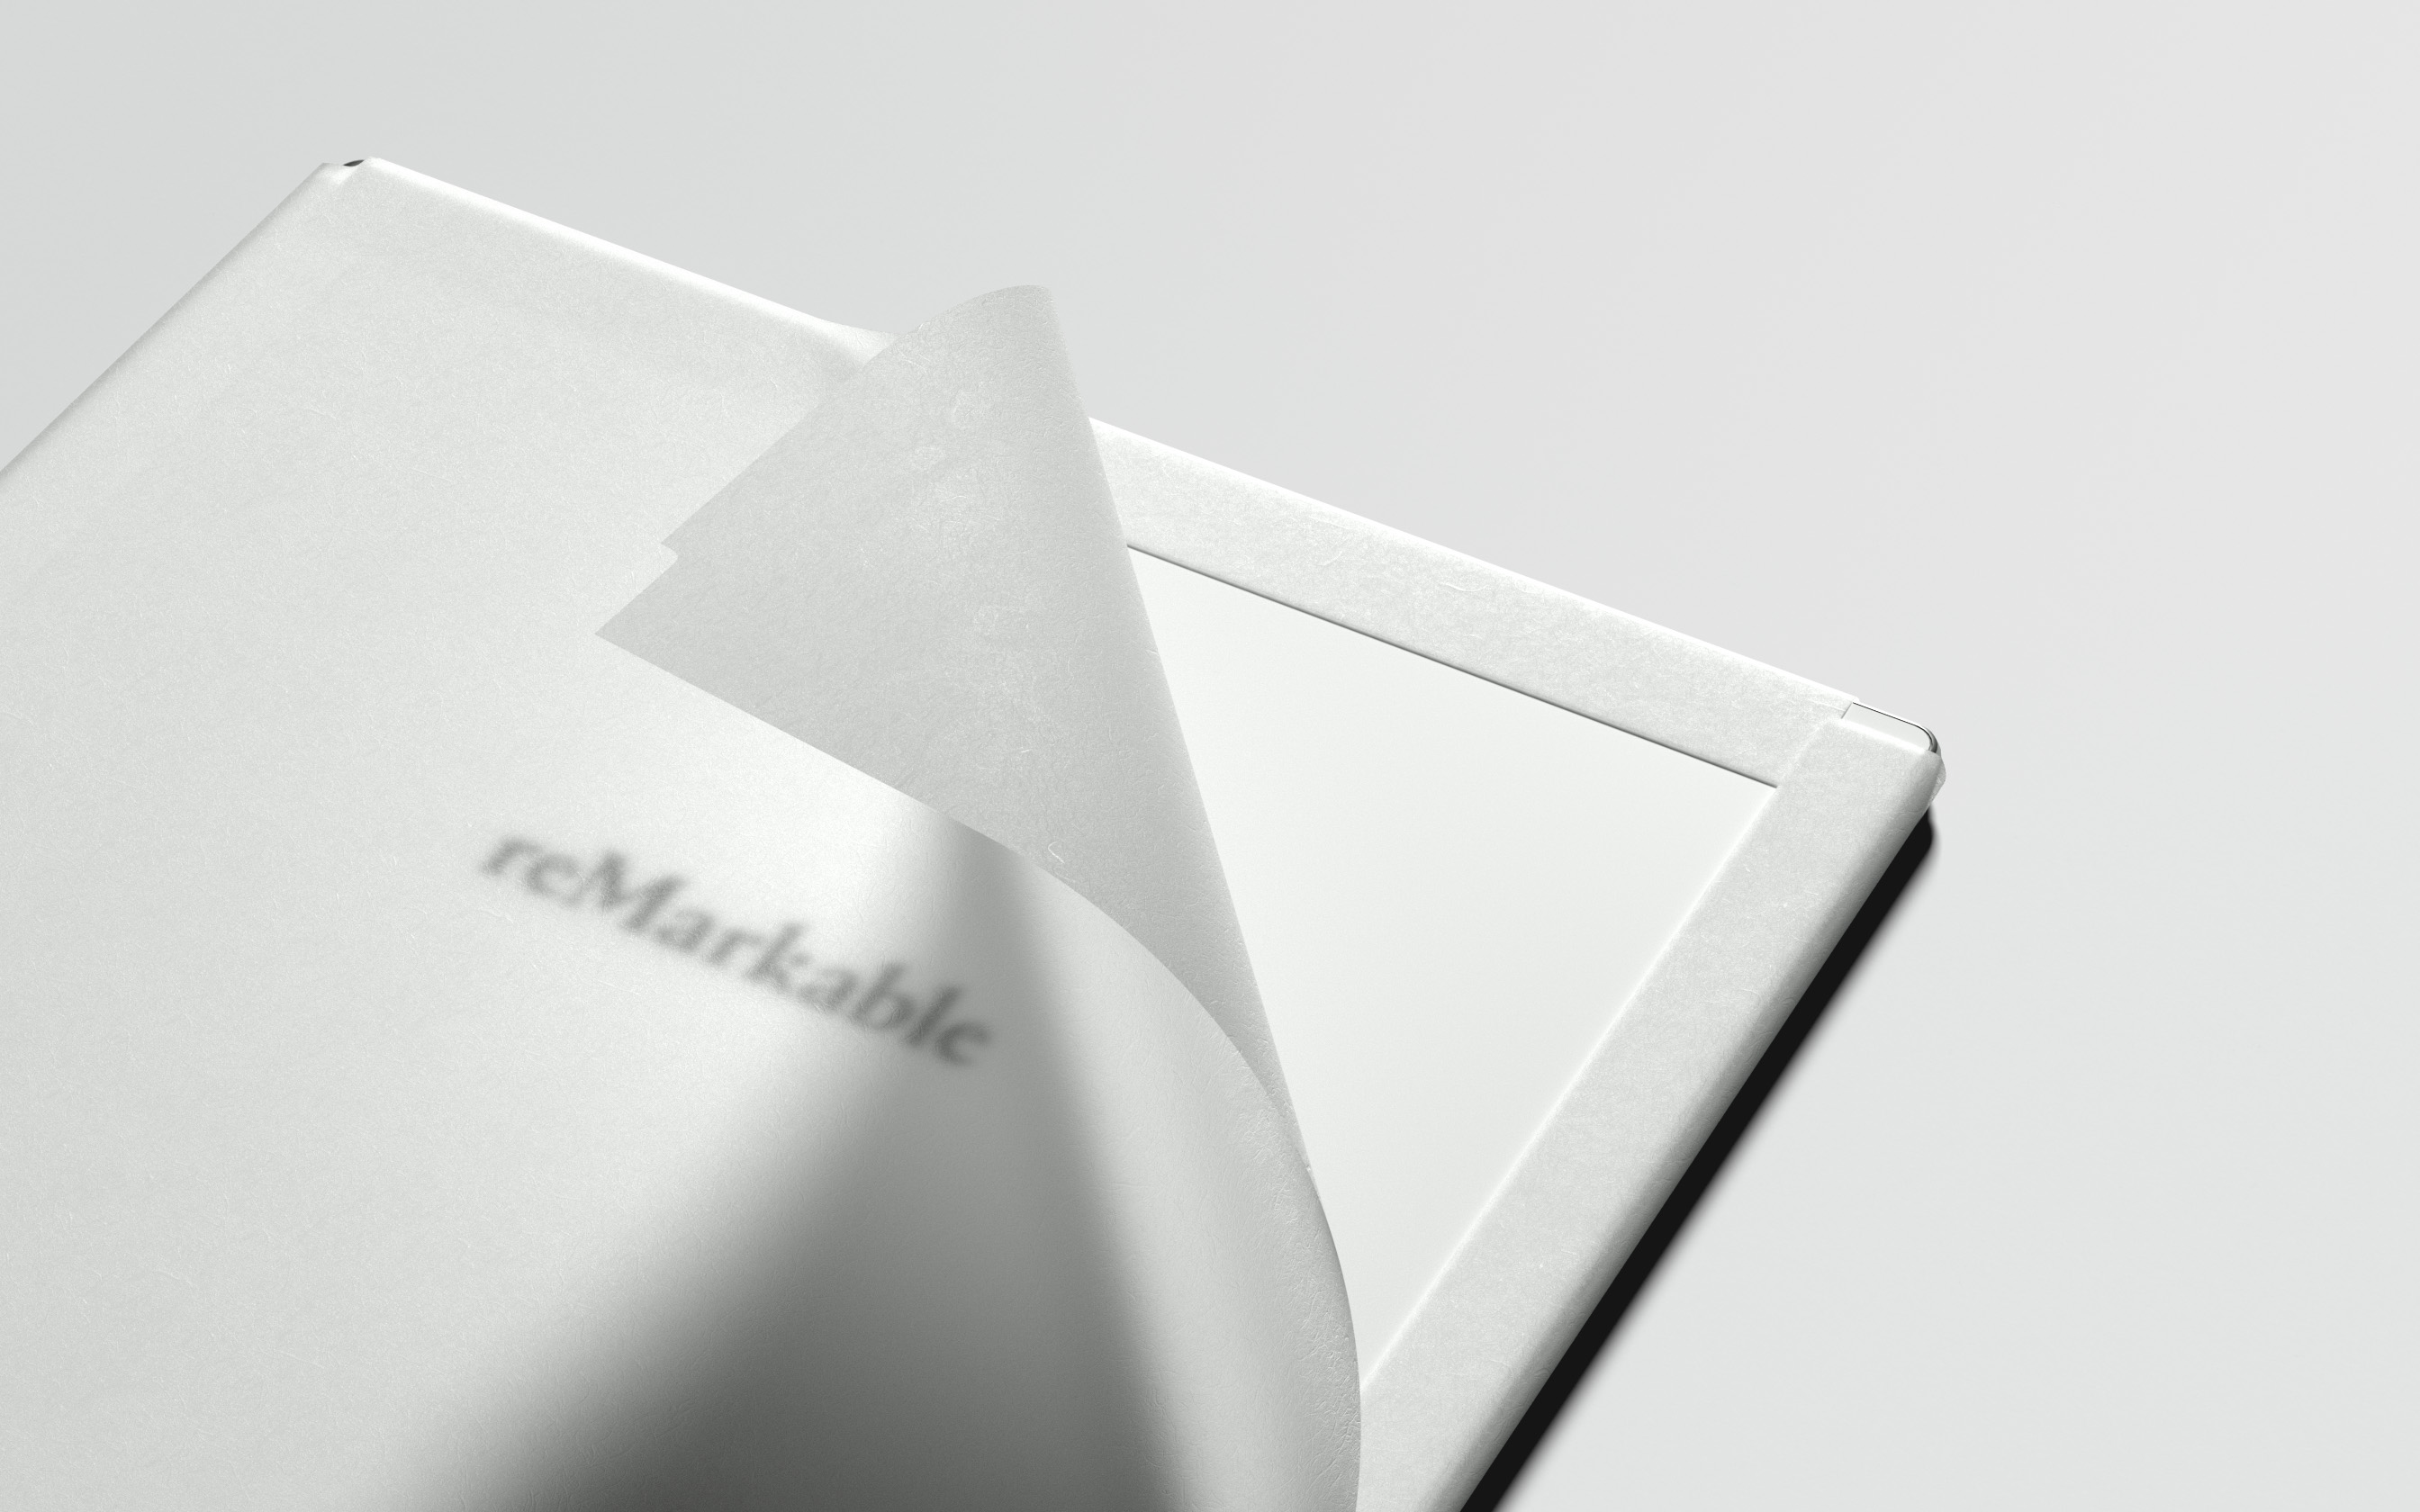 The packaging for reMarkable 2 is entirely made from paper, a first for  screen products